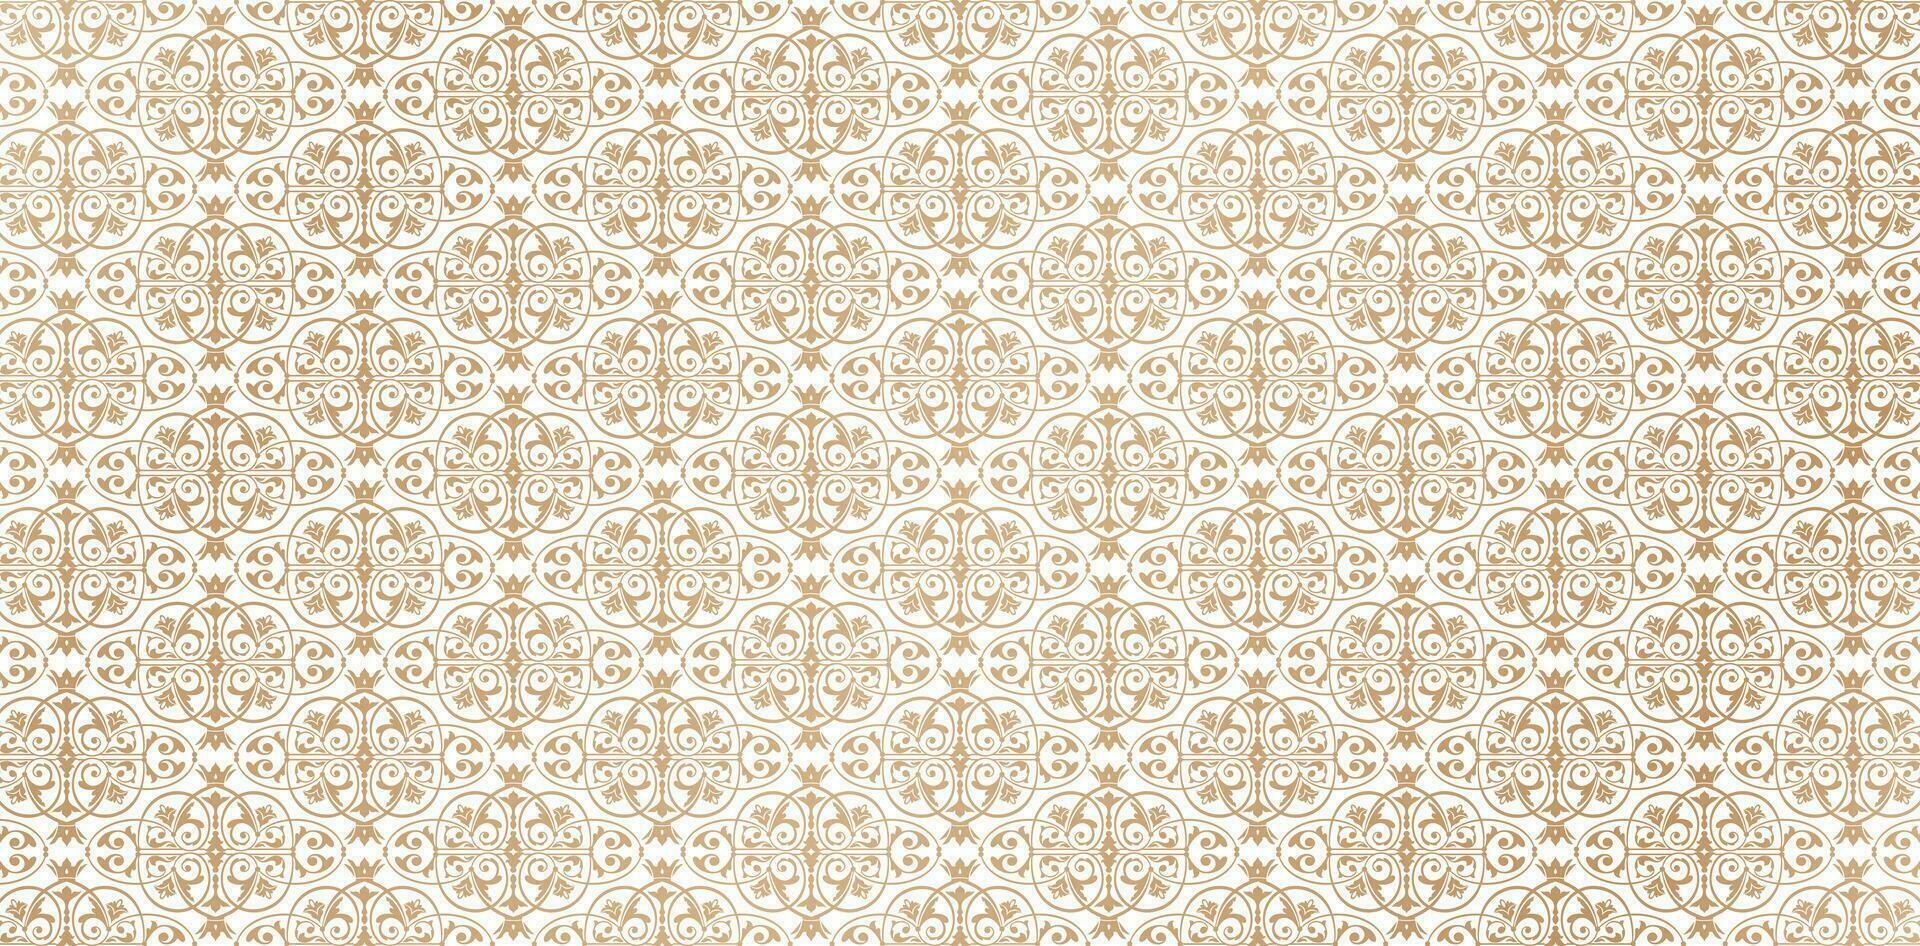 damask wallpapers vintages styles golden patterned vector illustrations for textile wall papers, books cover, Digital interfaces, prints templates material cards invitation, wrapping papers